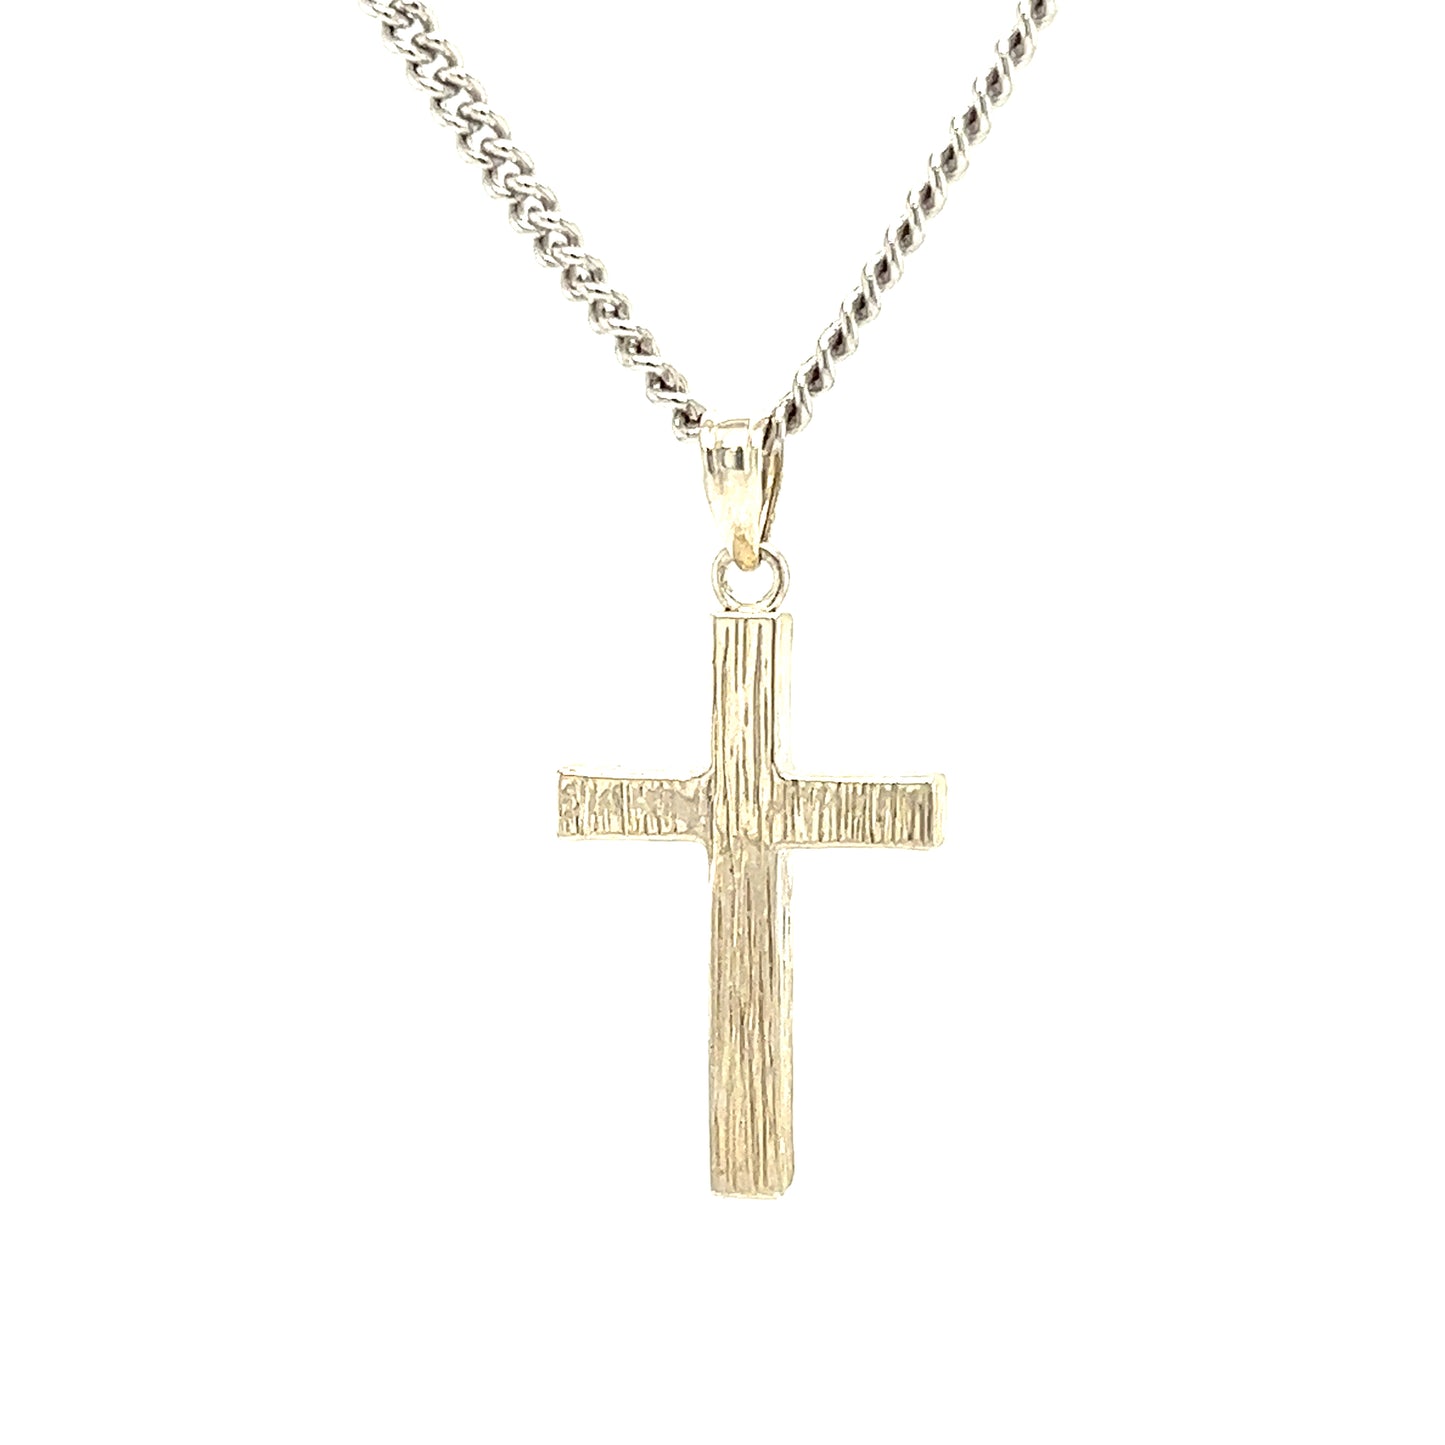 Crucifix Necklace with Black Epoxy in Sterling Silver